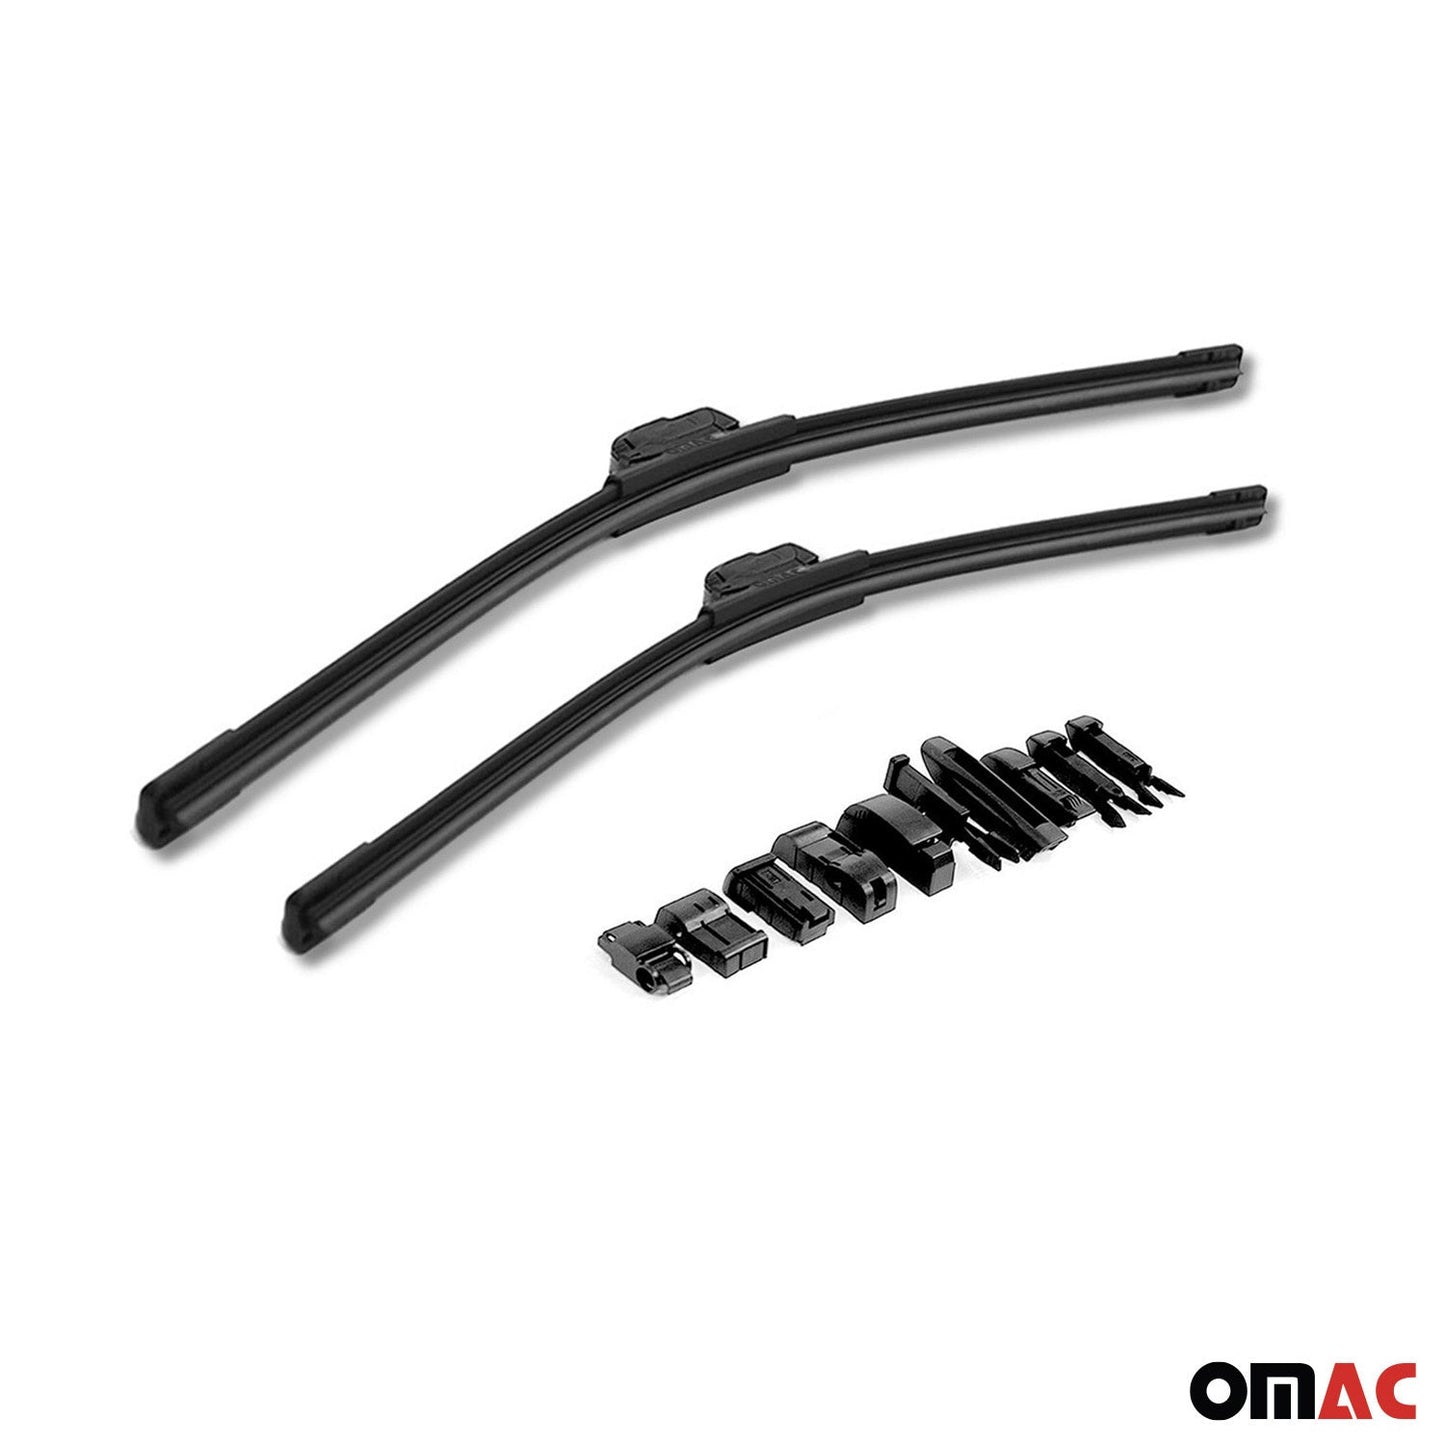 OMAC Front Windshield Wiper Blades Set for Chevrolet Camaro 1993-2002 A046632